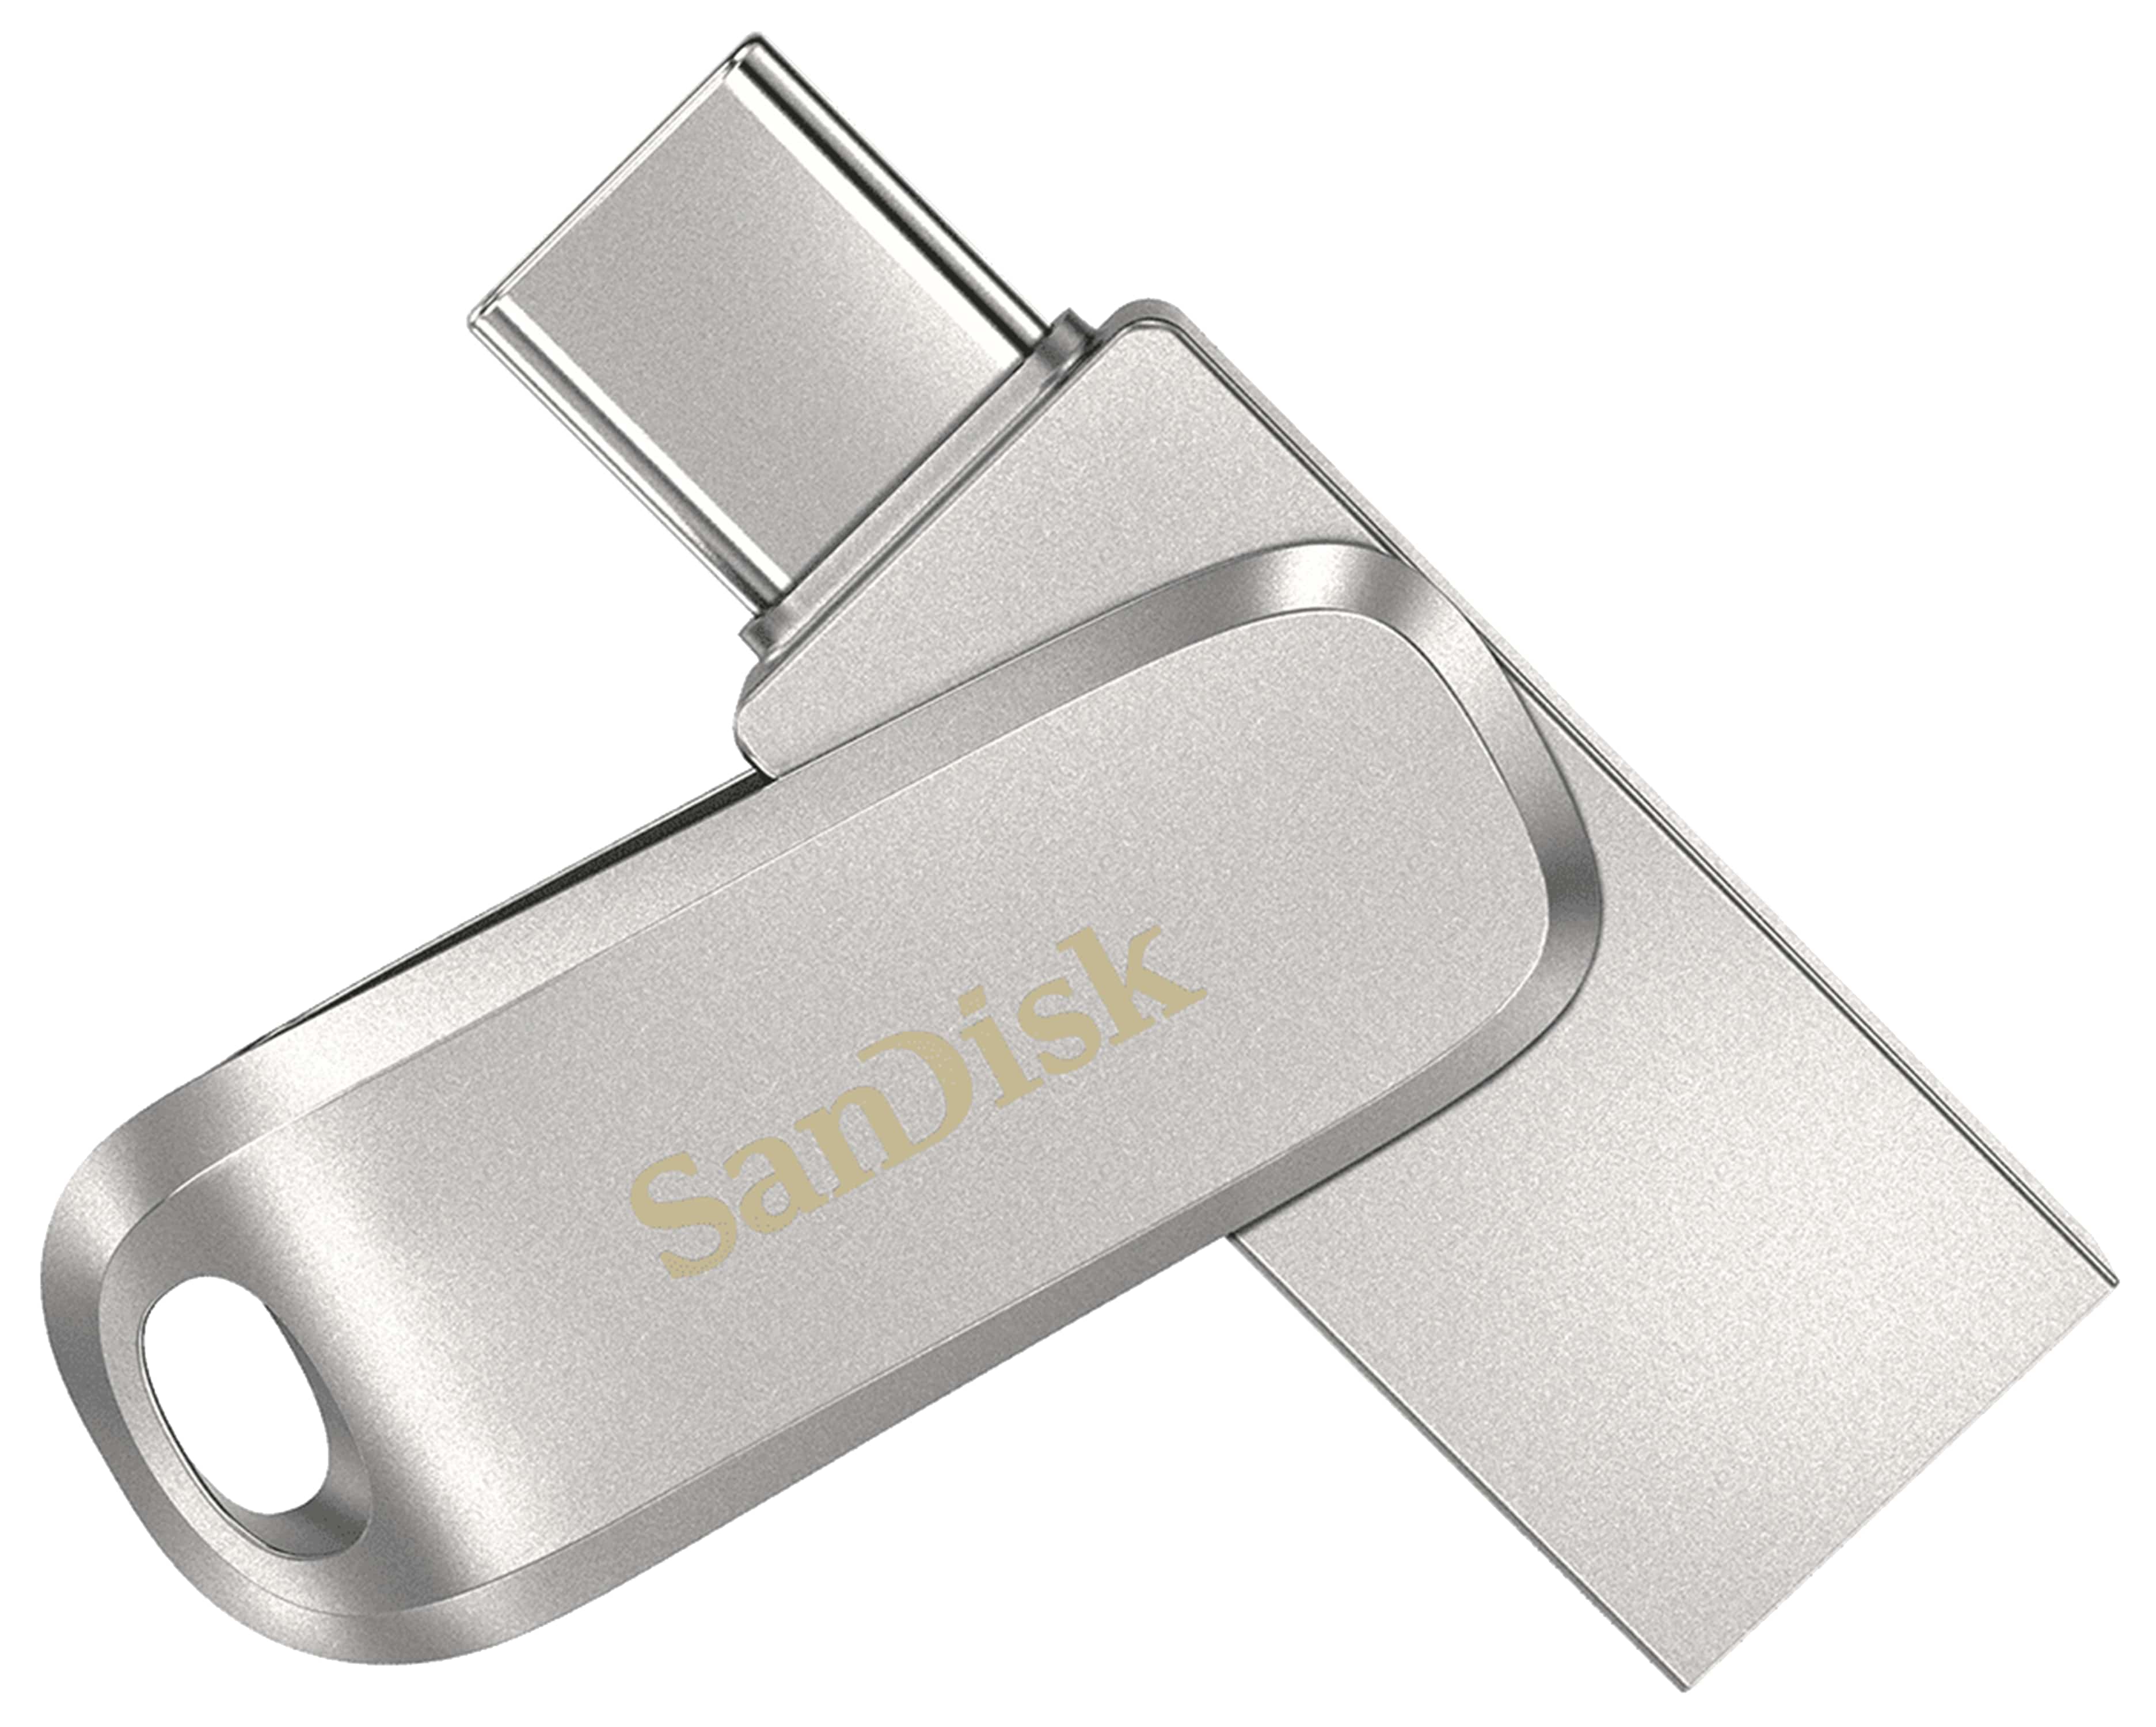 SANDISK USB Stick Ultra Dual Drive Luxe 64GB